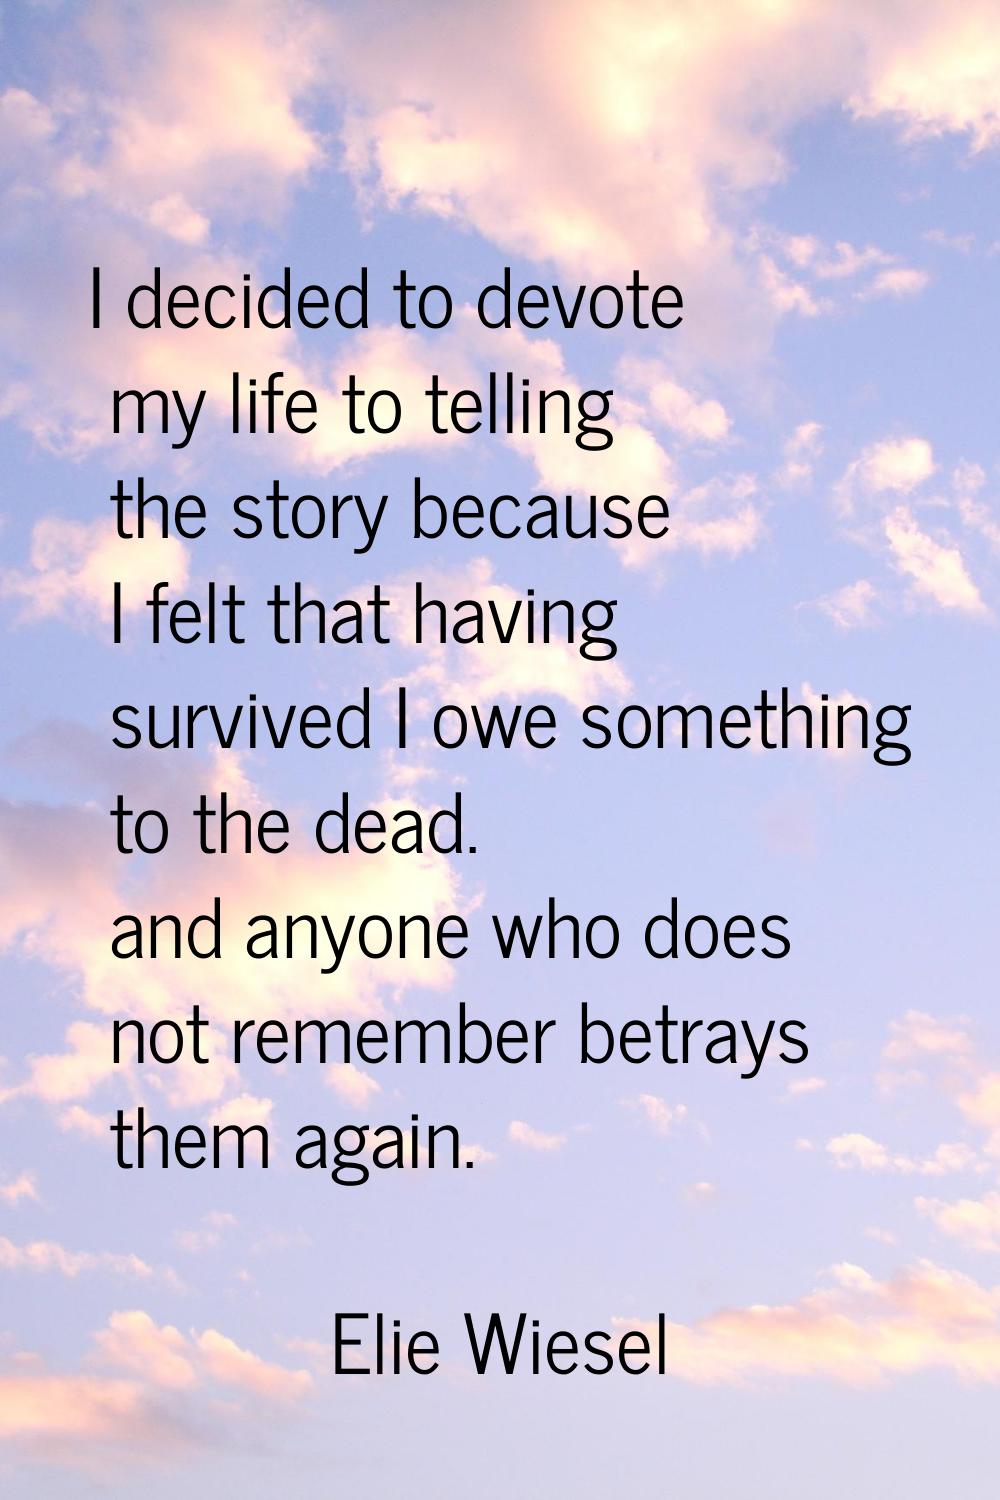 I decided to devote my life to telling the story because I felt that having survived I owe somethin